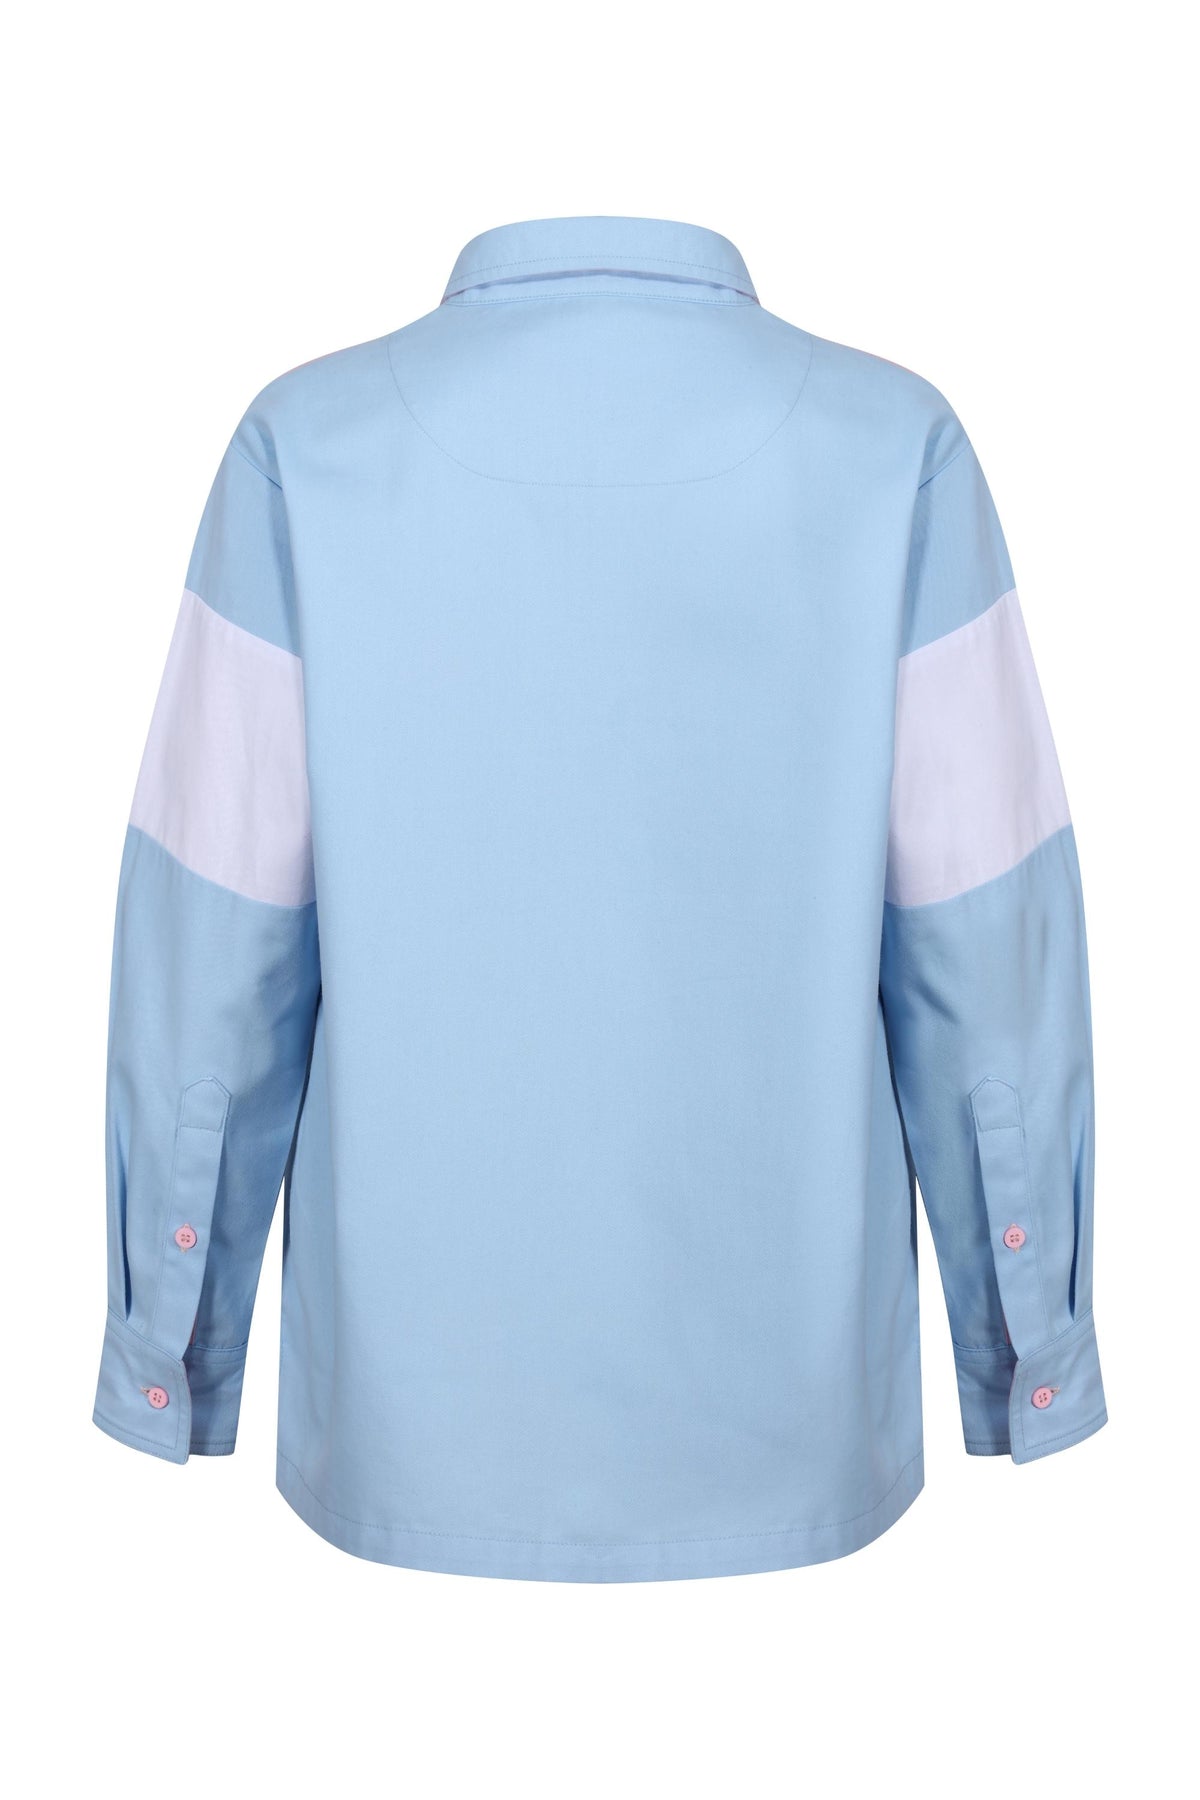 Torbay Unisex Deck Shirt - Blue/Pink - Whale Of A Time Clothing